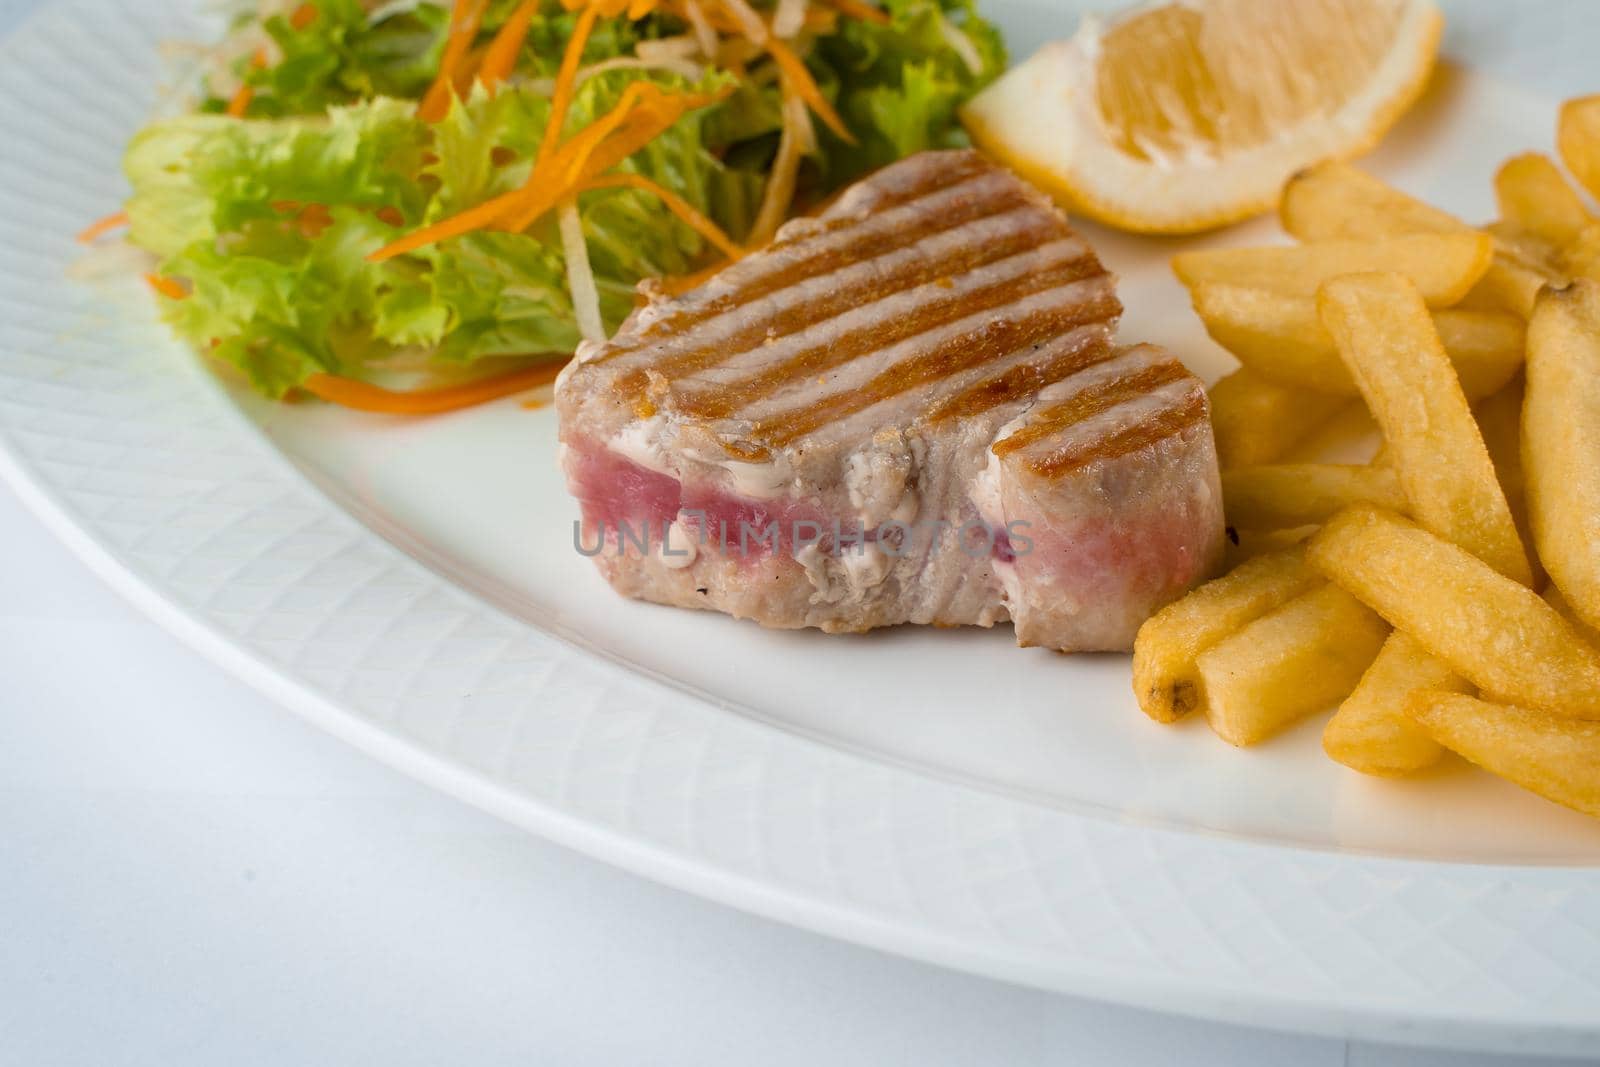 Tuna steak grilled with french fries salad of carrots, parsnips, lettuce and lemon on white plate on white background